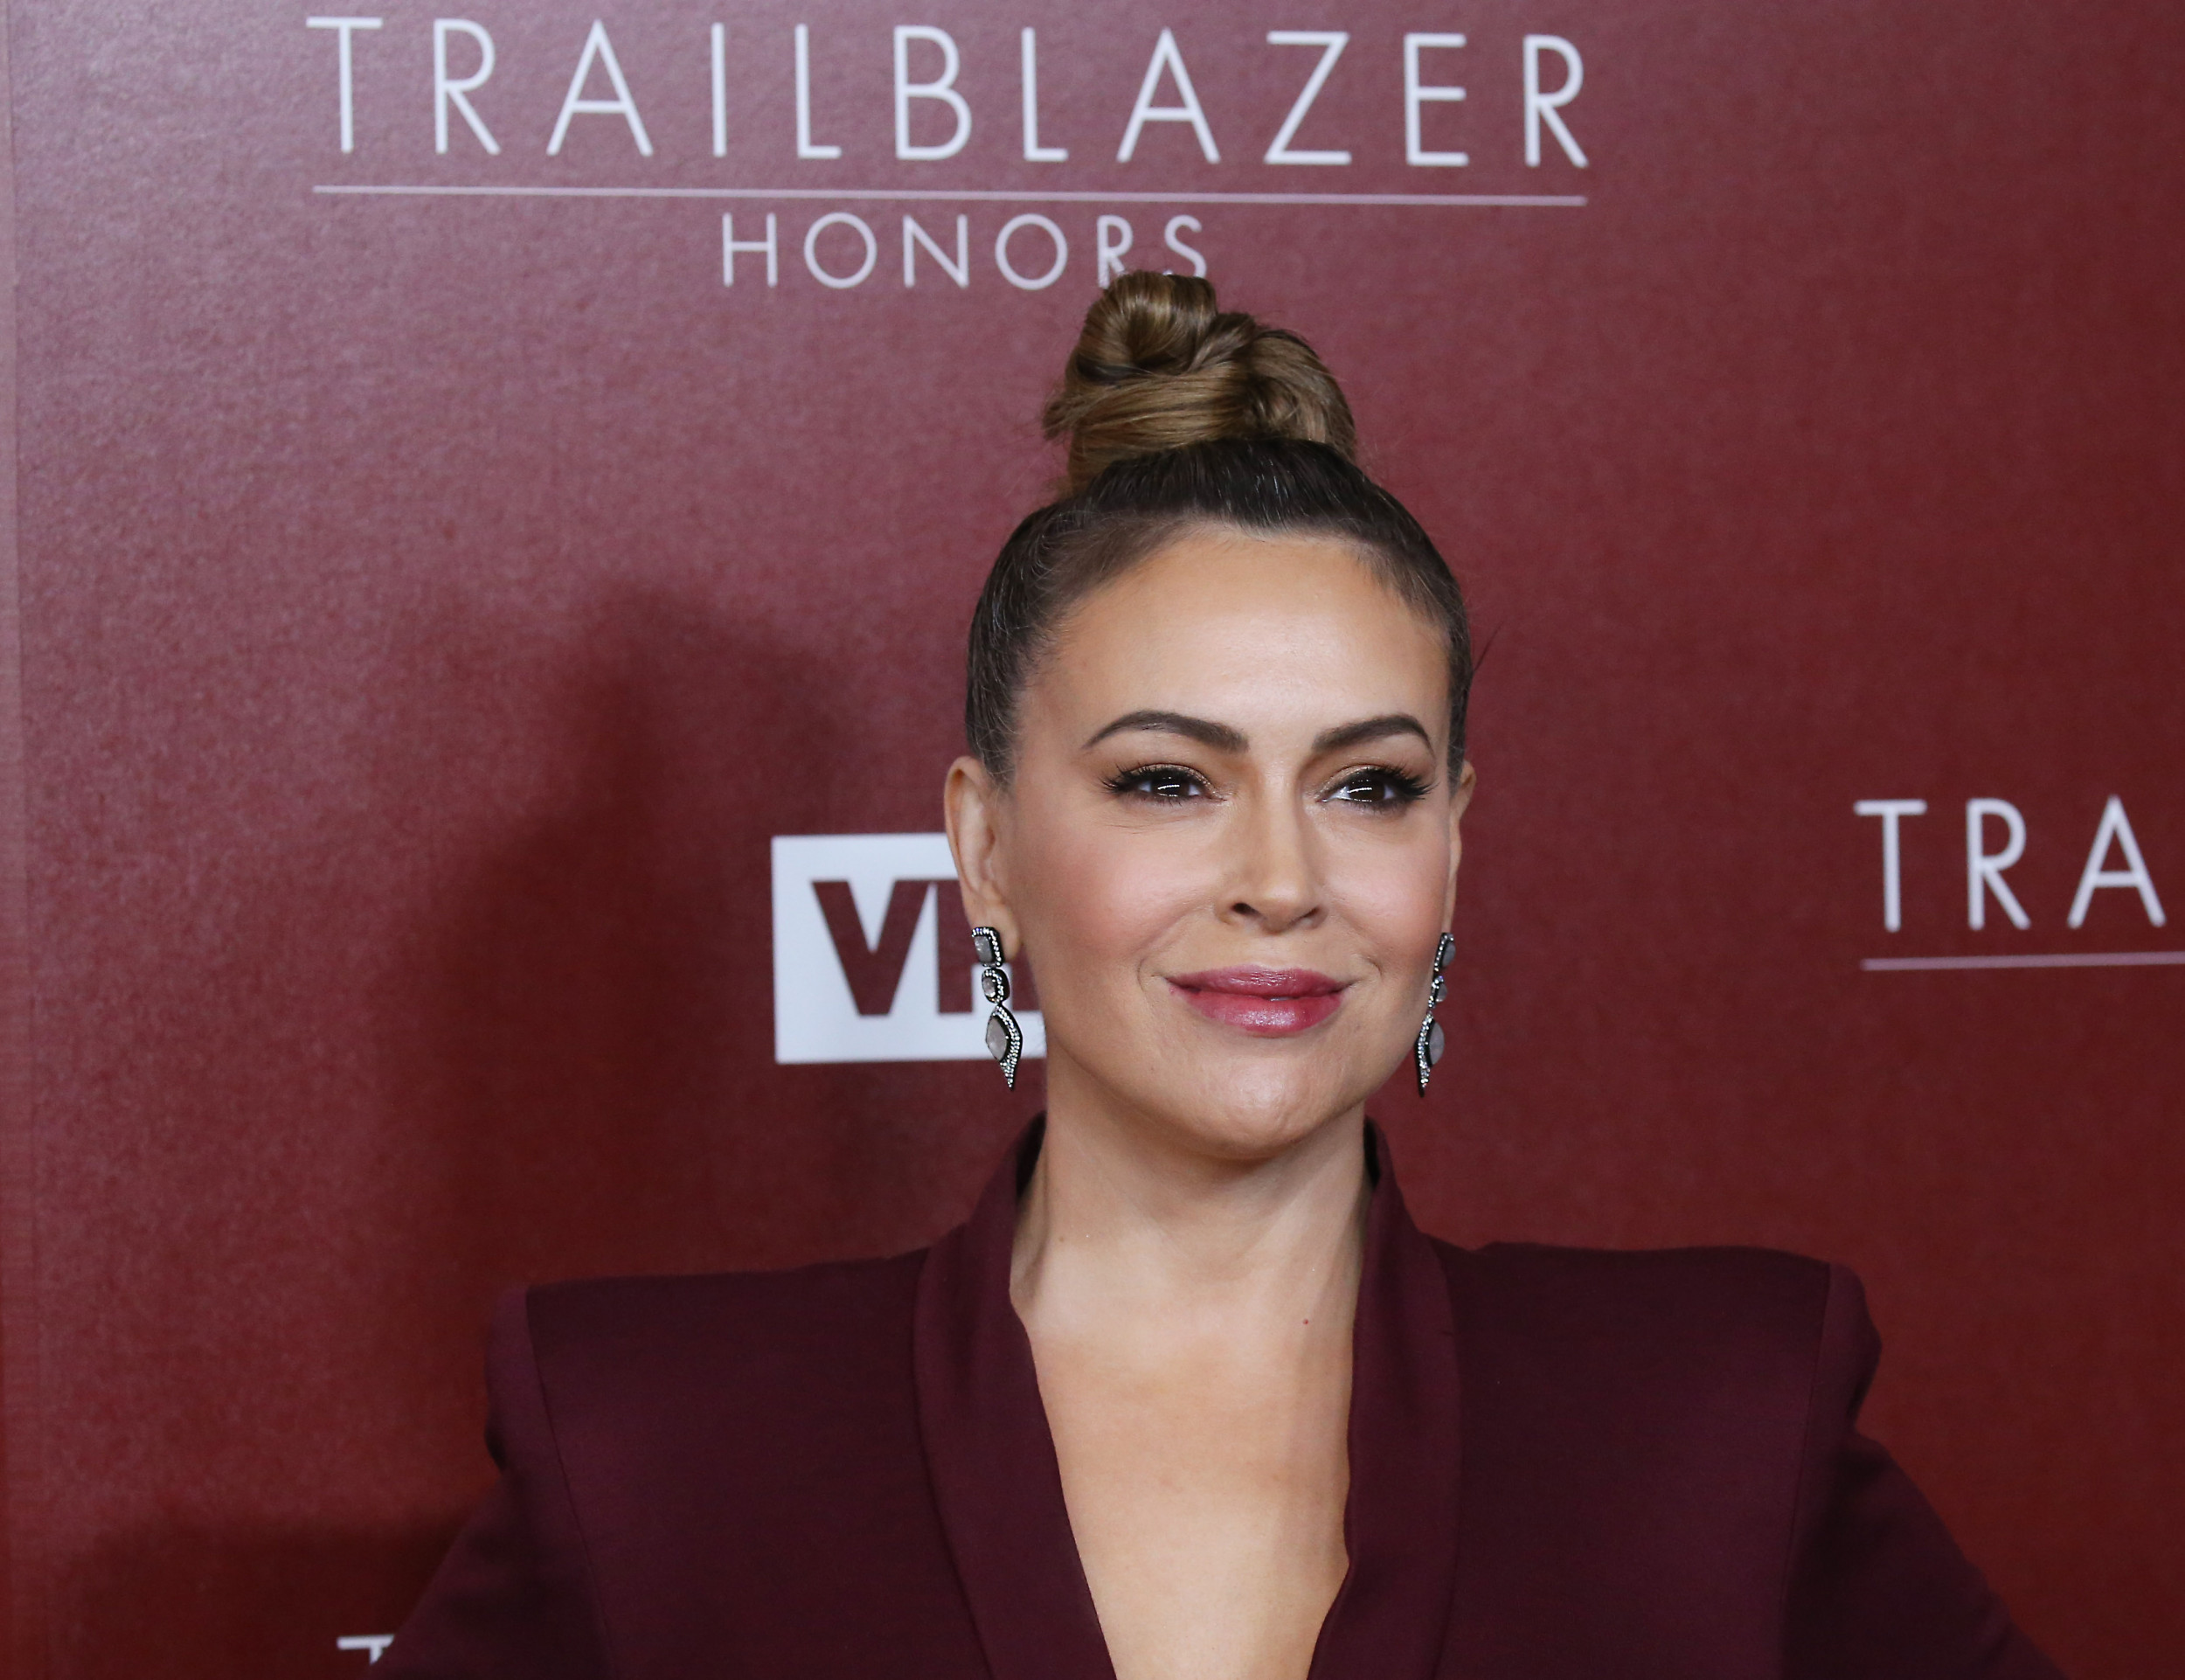 Alyssa Milano Criticized For Extending Olive Branch To Trump Supporters